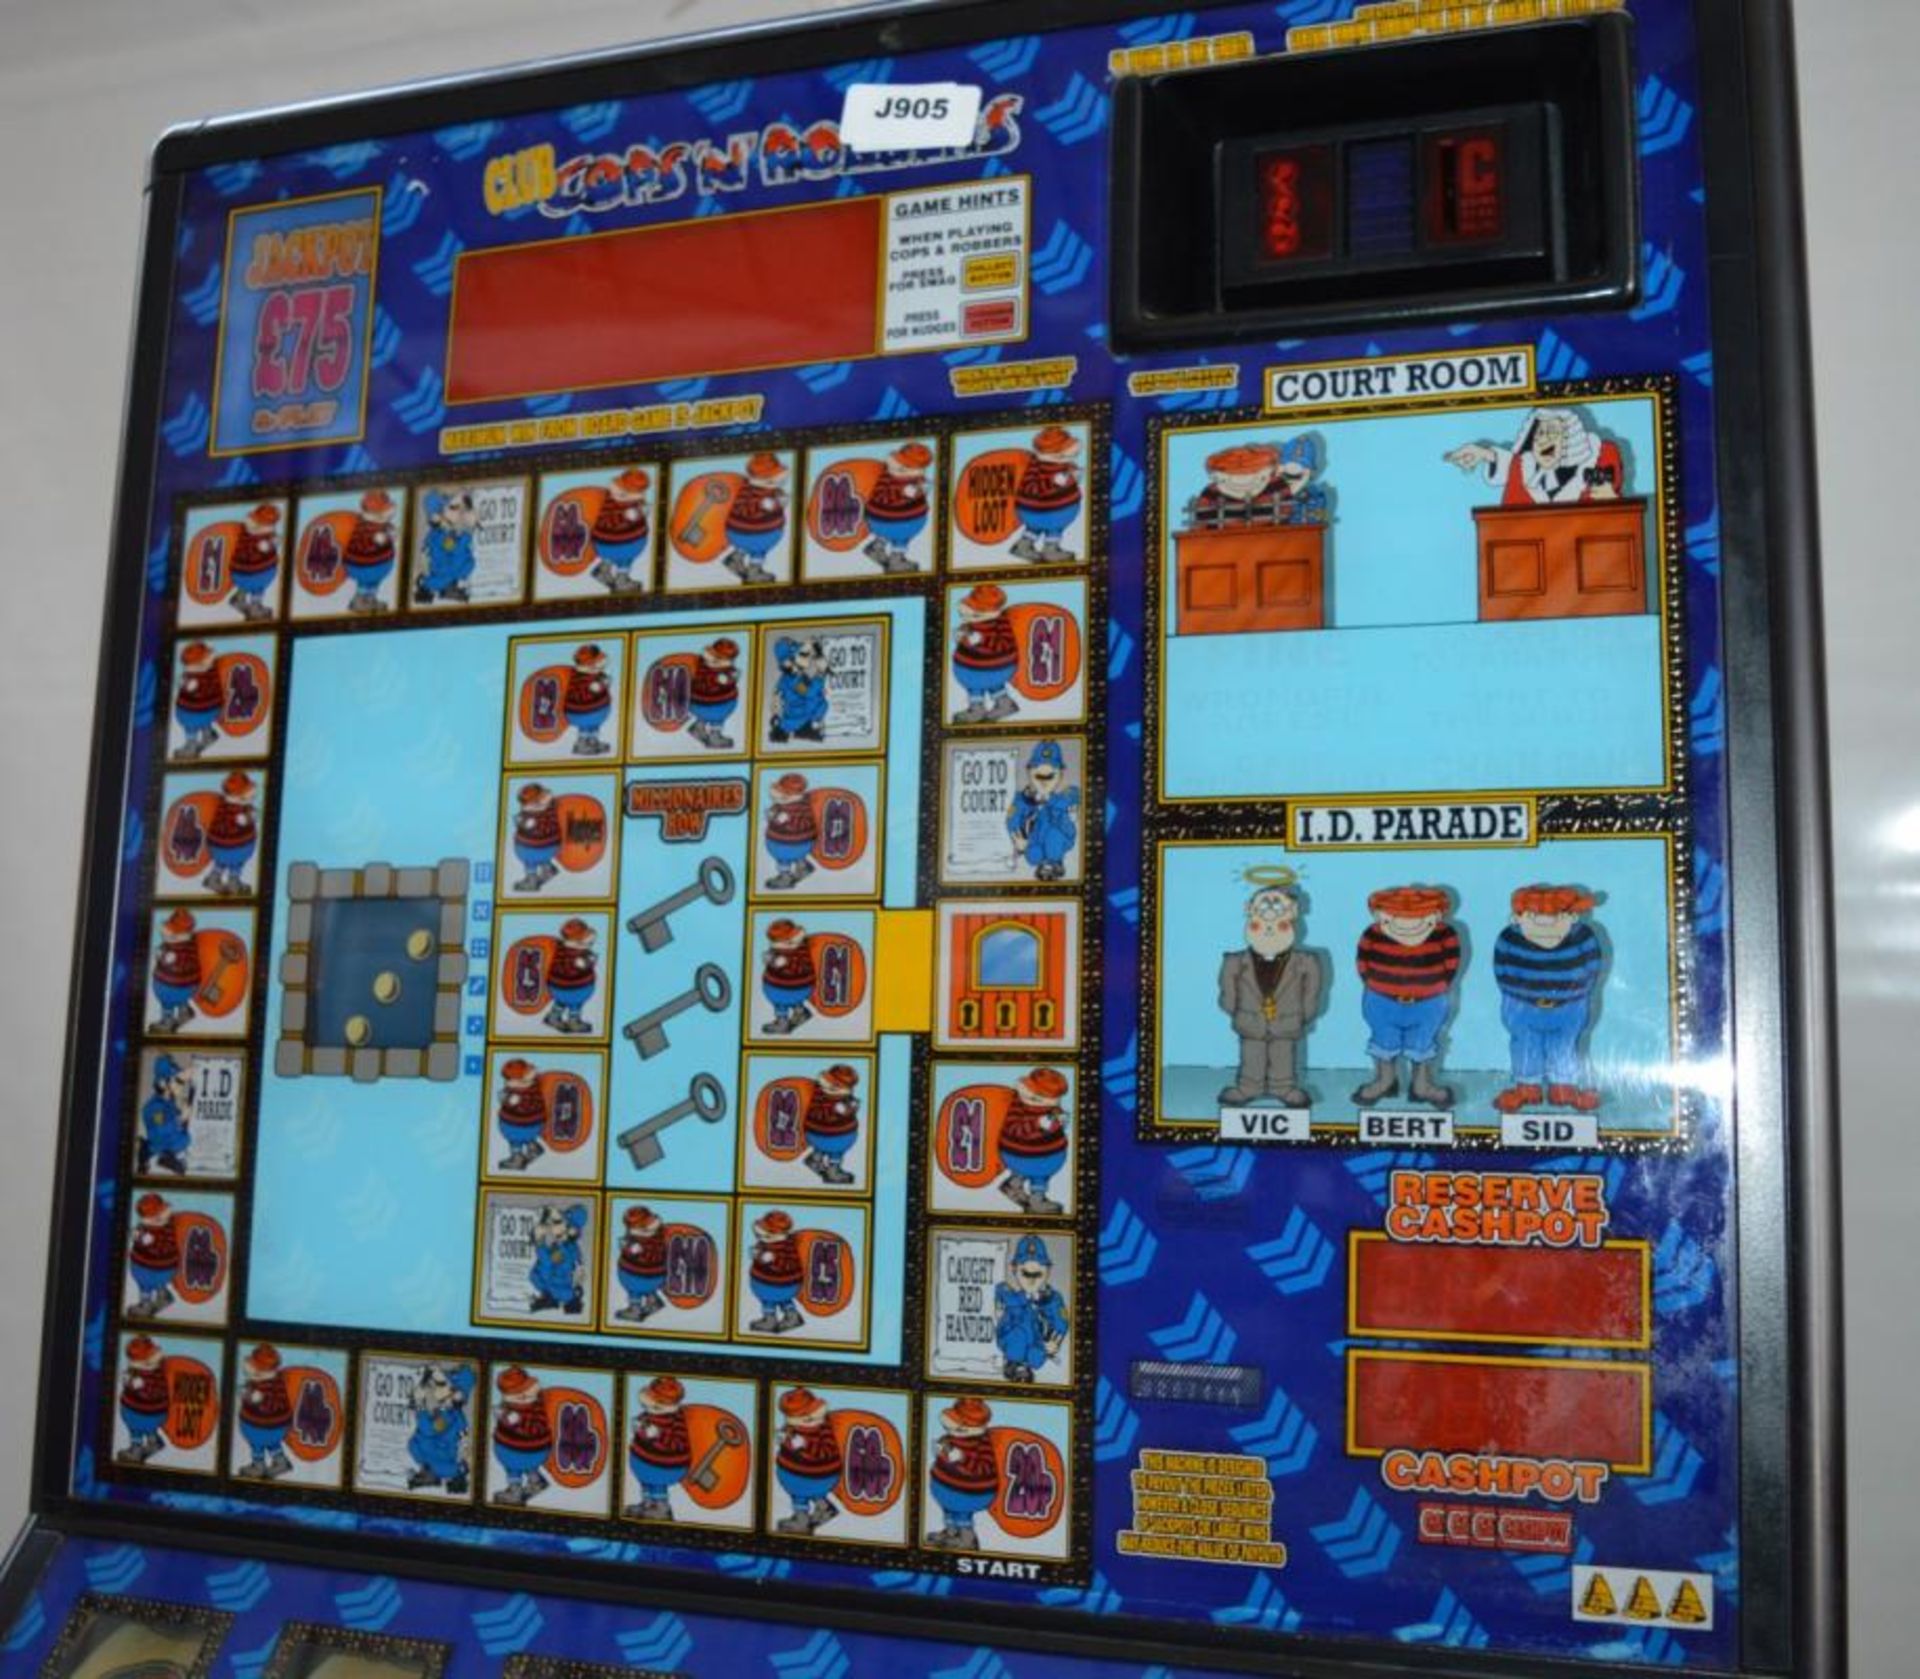 1 x Andy Capp Cops N Robbers Fruit Machine - 1994 - Good Cosmetic Conditon With Paperwork - No Power - Image 10 of 15